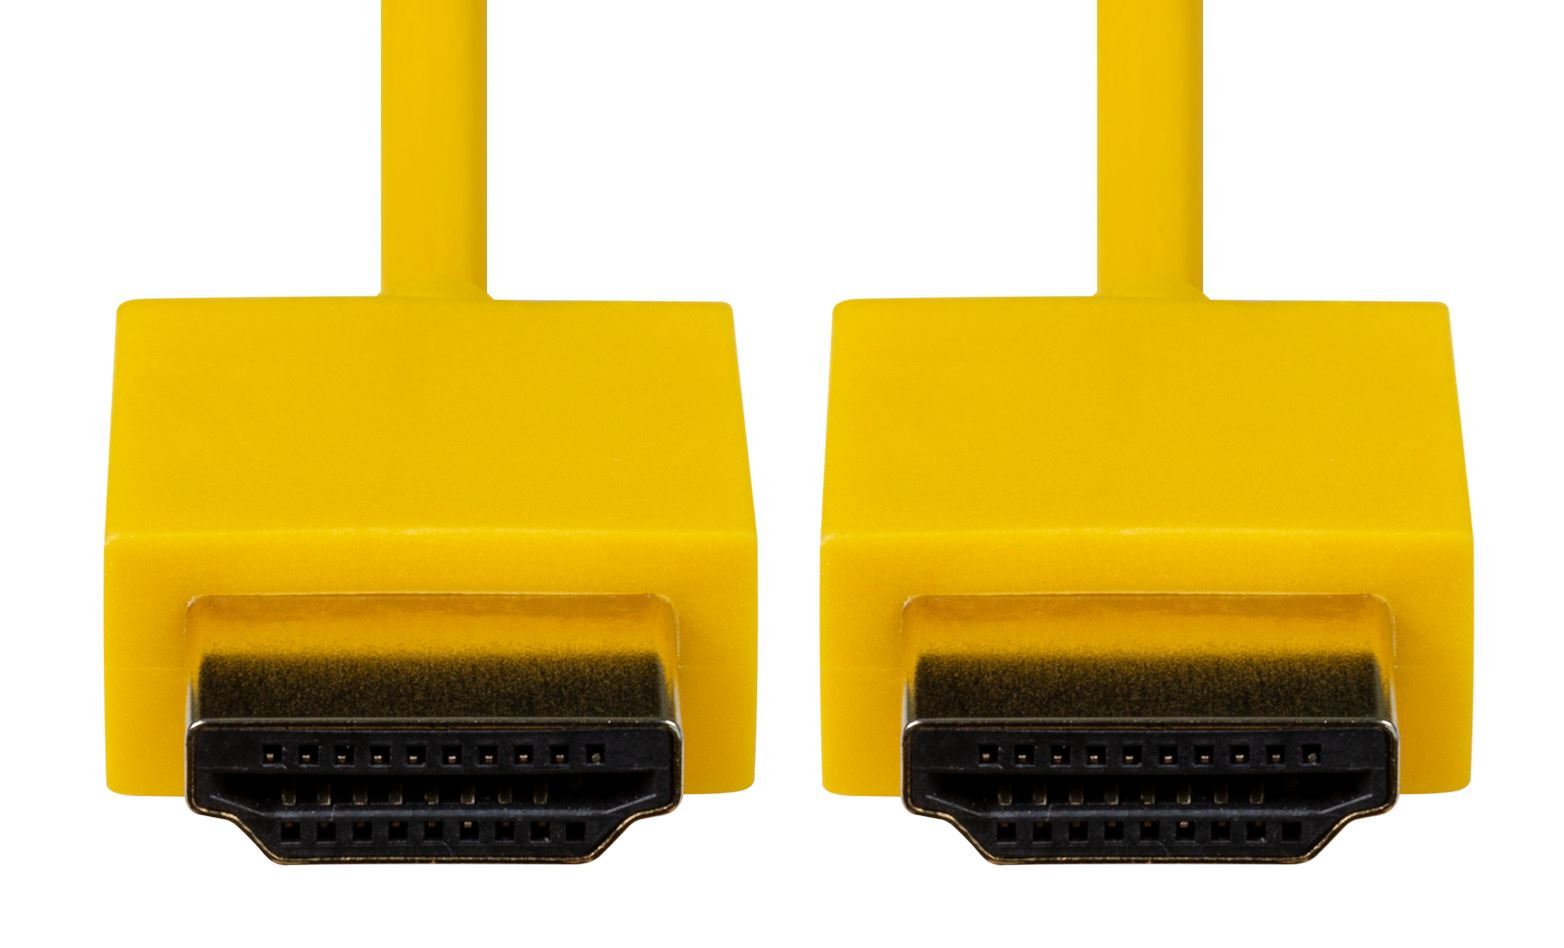 DYNAMIX_0.5M_HDMI_YELLOW_Nano_High_Speed_With_Ethernet_Cable._Designed_for_UHD_Display_up_to_4K2K@60Hz._Slimline_Robust_Cable._Supports_CEC_2.0,_3D,_&_ARC._Supports_Up_to_32_July_ON_SALE_-_Up_to_50%_OFF 797